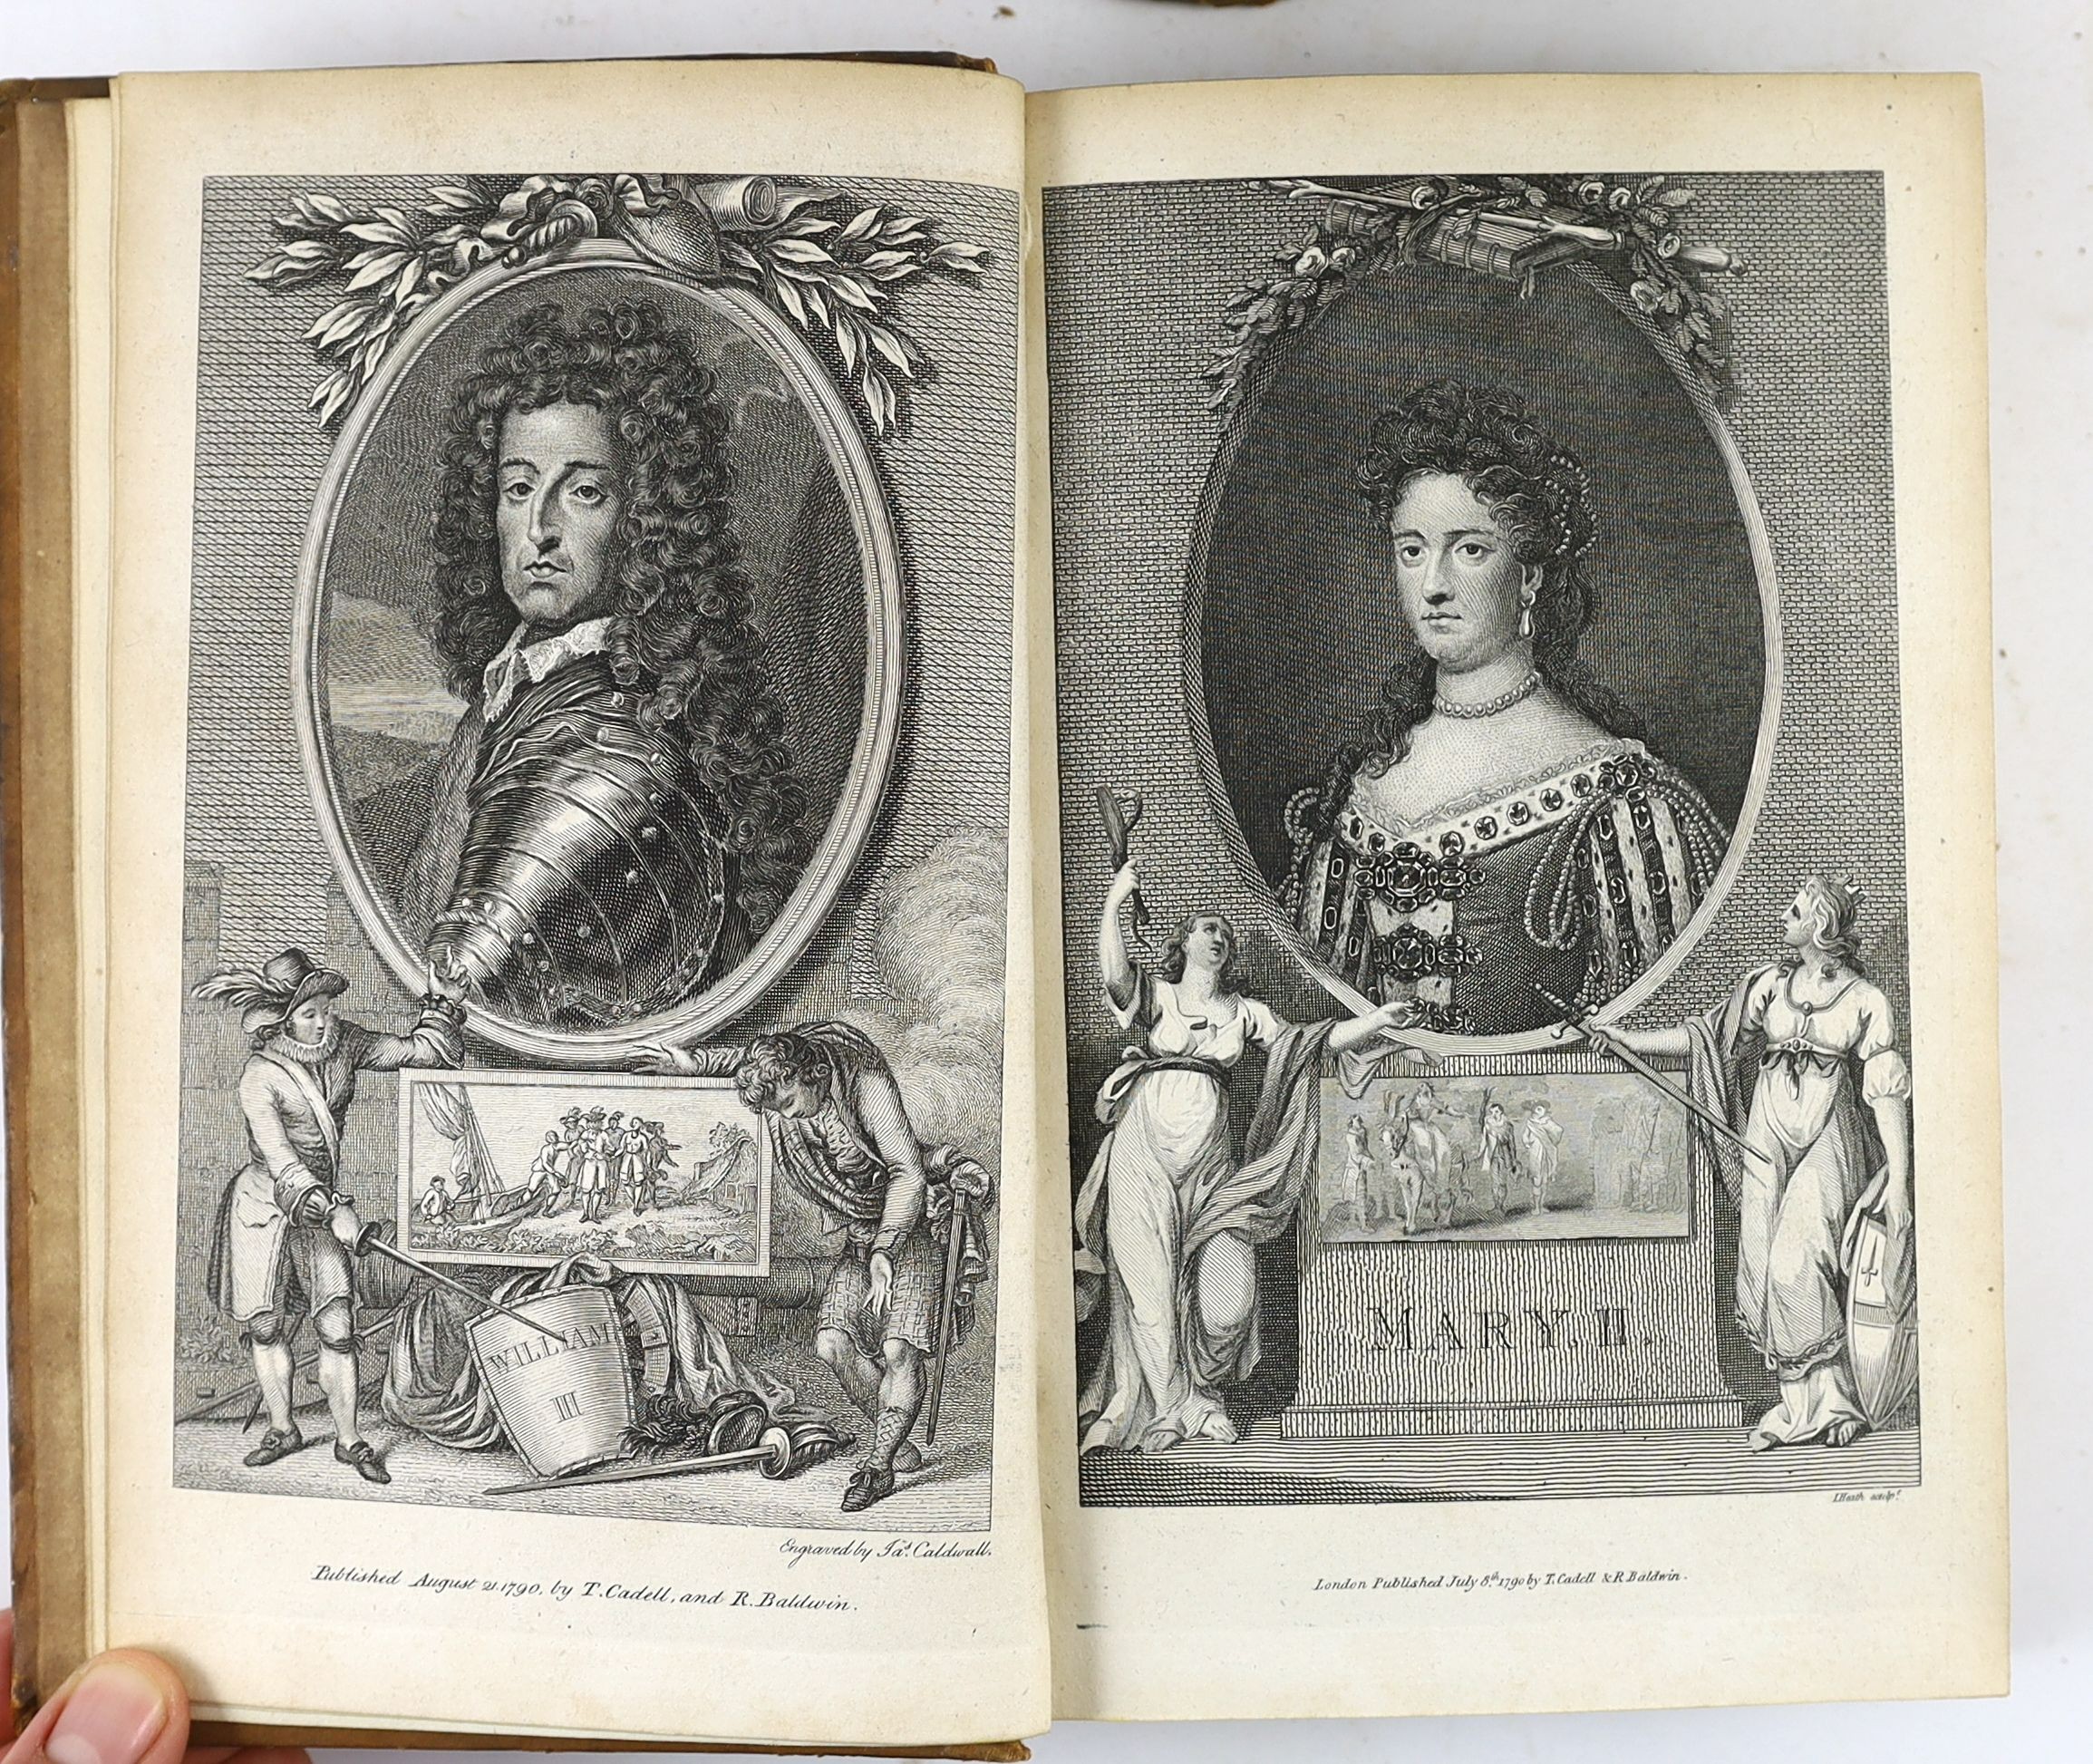 Smollett, Tobias - The History of England, 5 vols, 8vo, tree calf, with authors portrait and 11 other portrait engravings, London, 1791